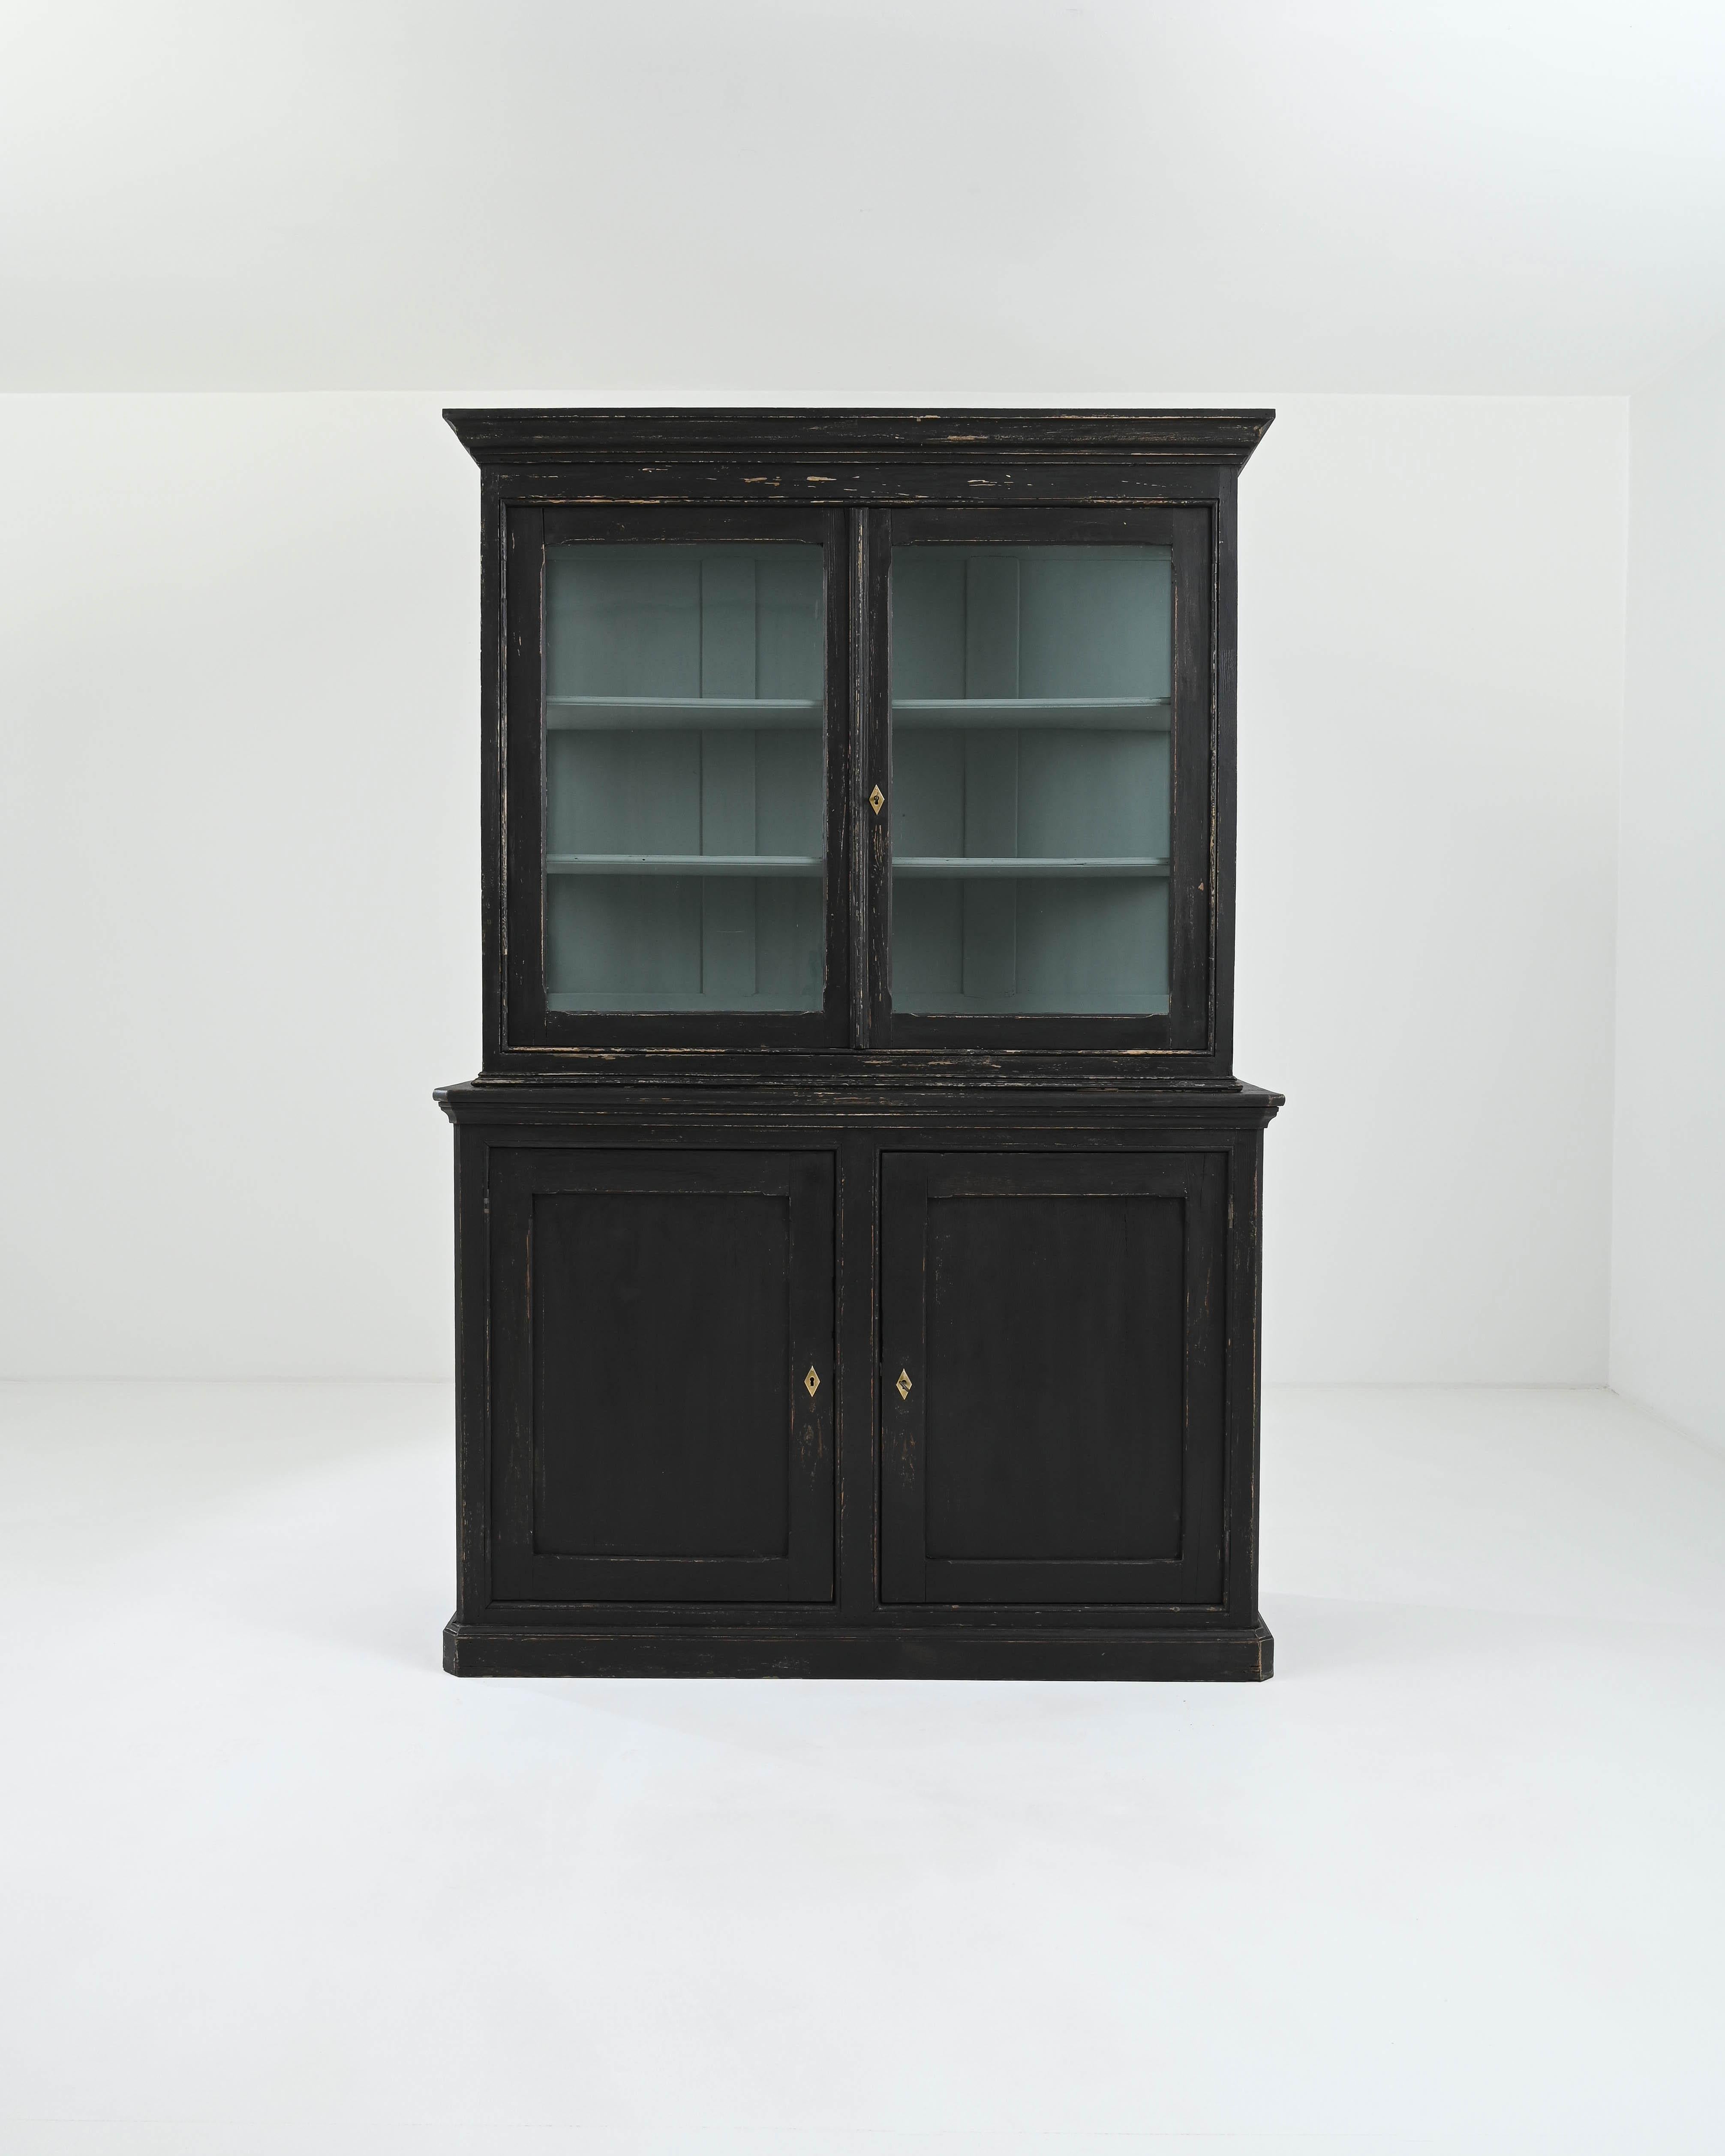 This elegant vitrine à deux corps, hand-crafted in France during the 19th century, exudes a flawless symmetry evident in the plinth base's contours; geometric carvings of the panels; and pointed edges of the molded cornice, mirrored in the corners